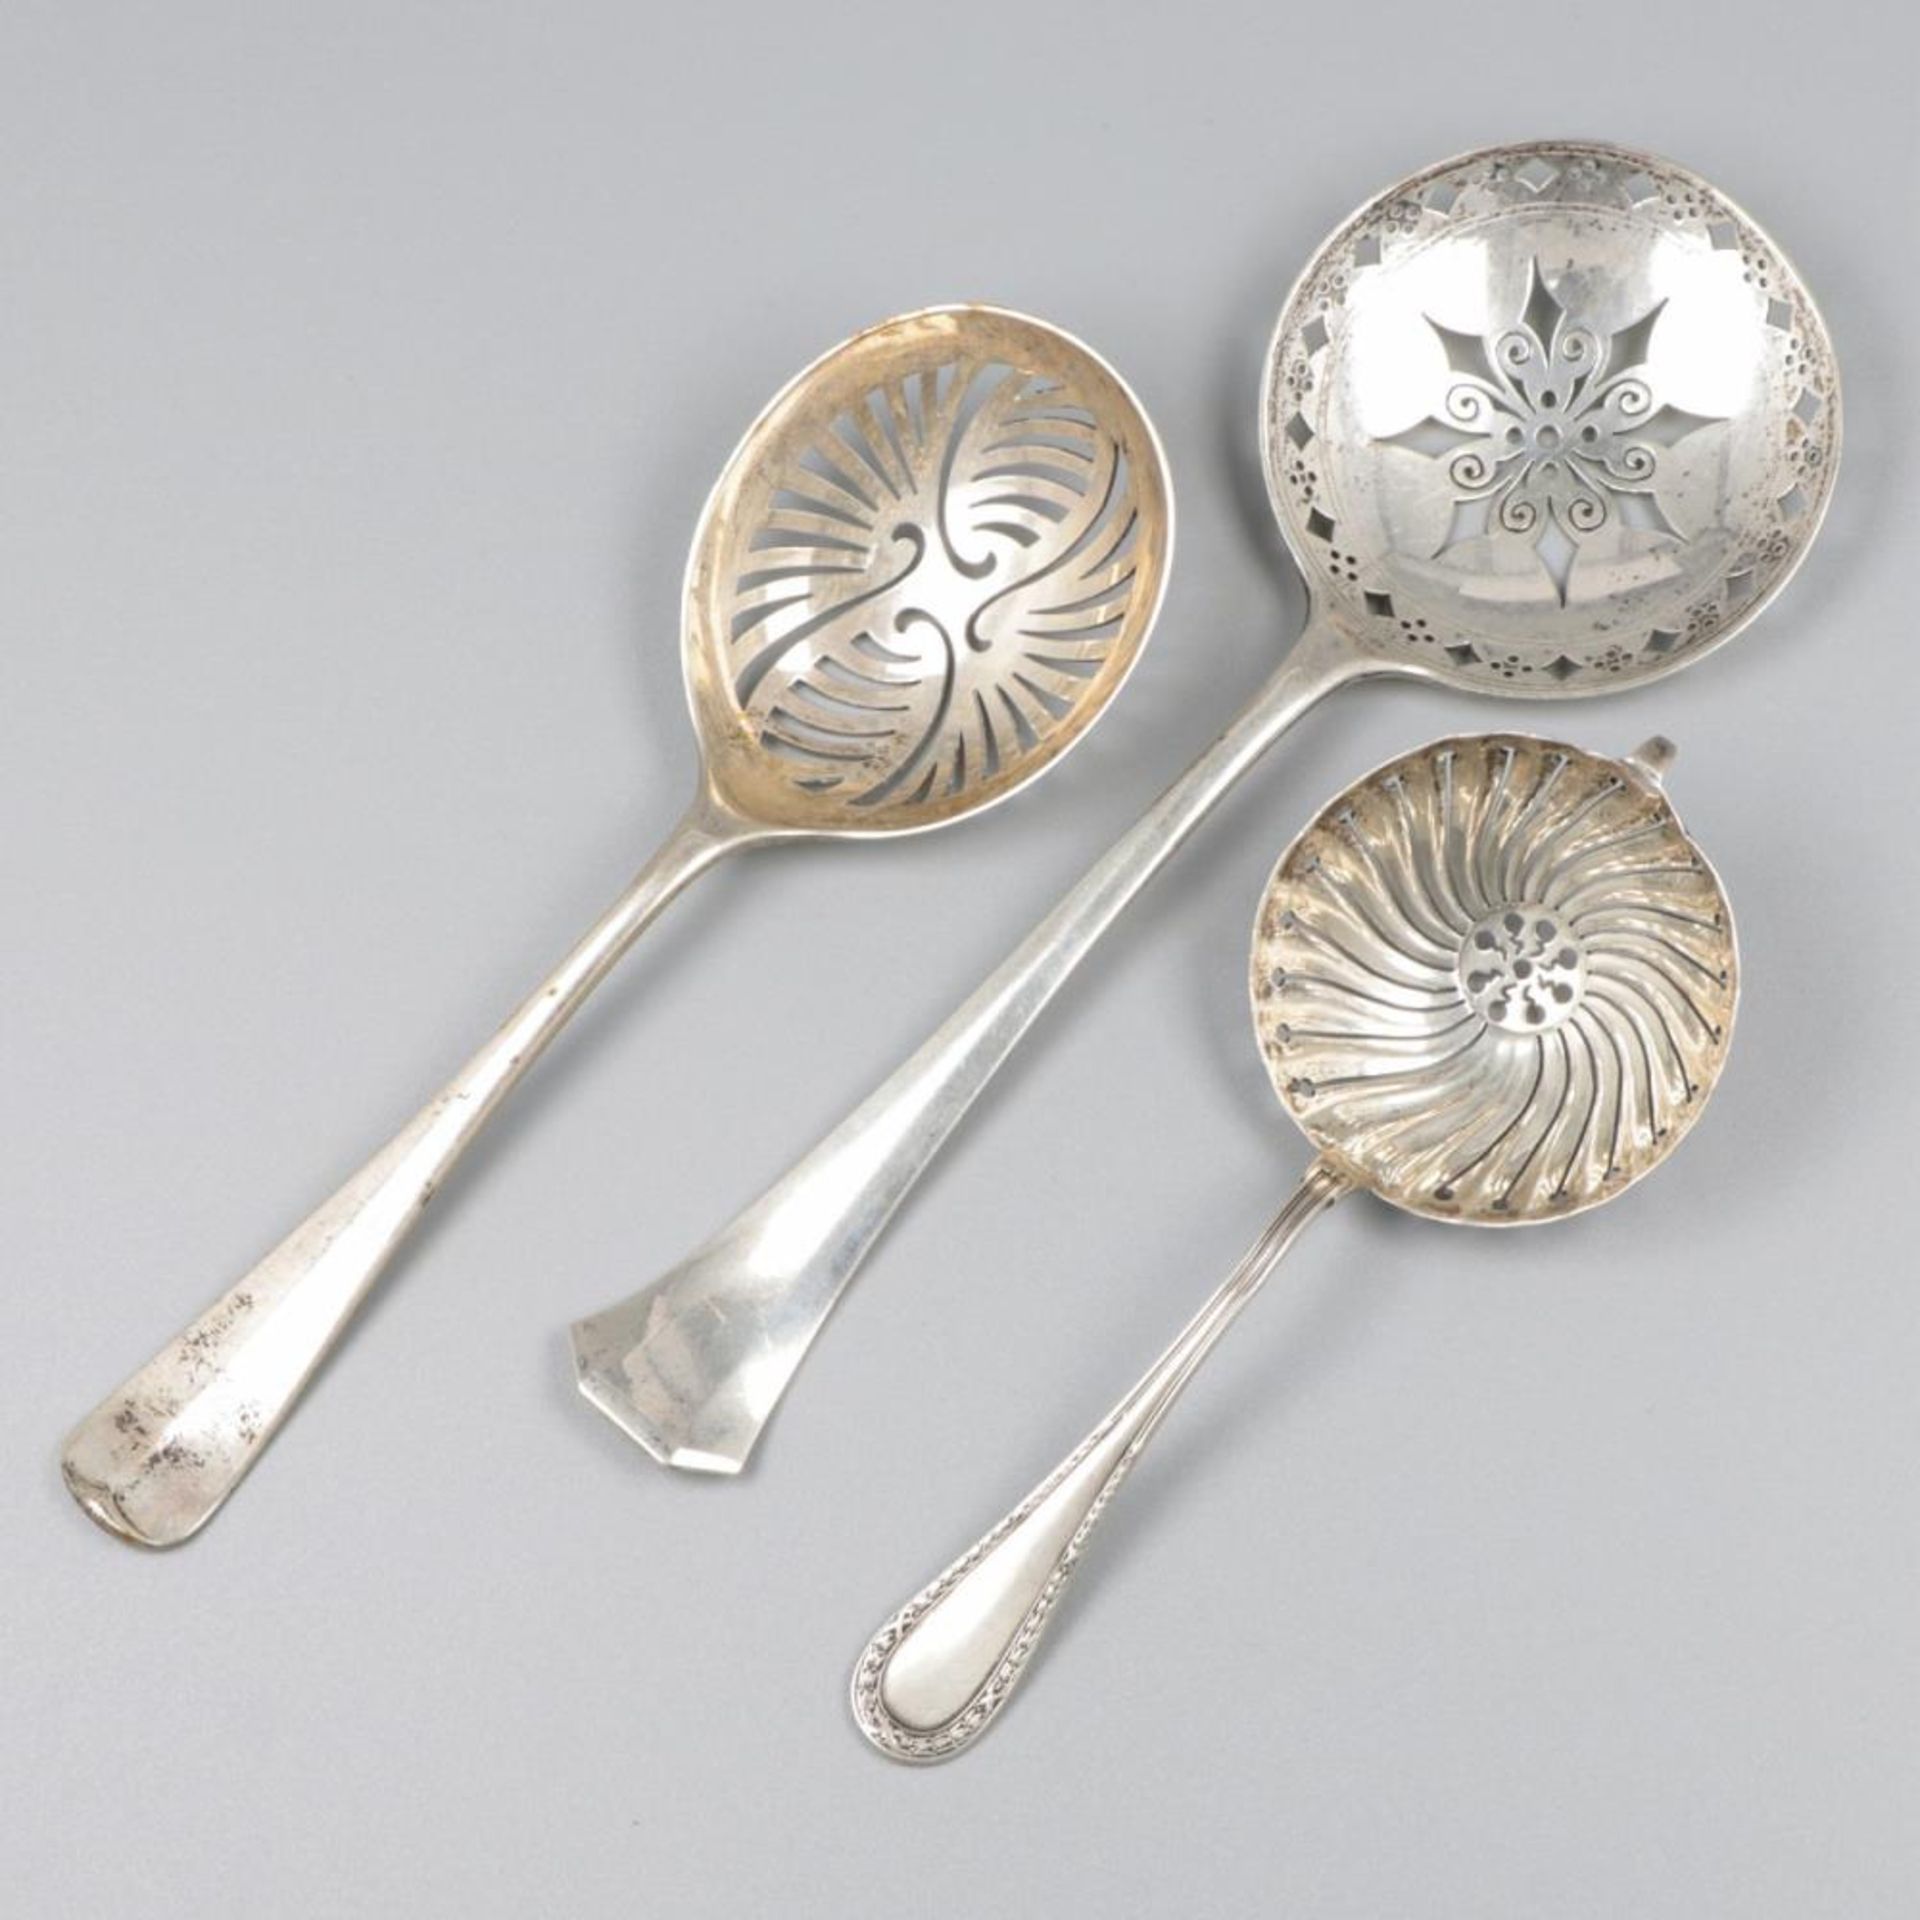 3-piece lot of sifter spoons silver.